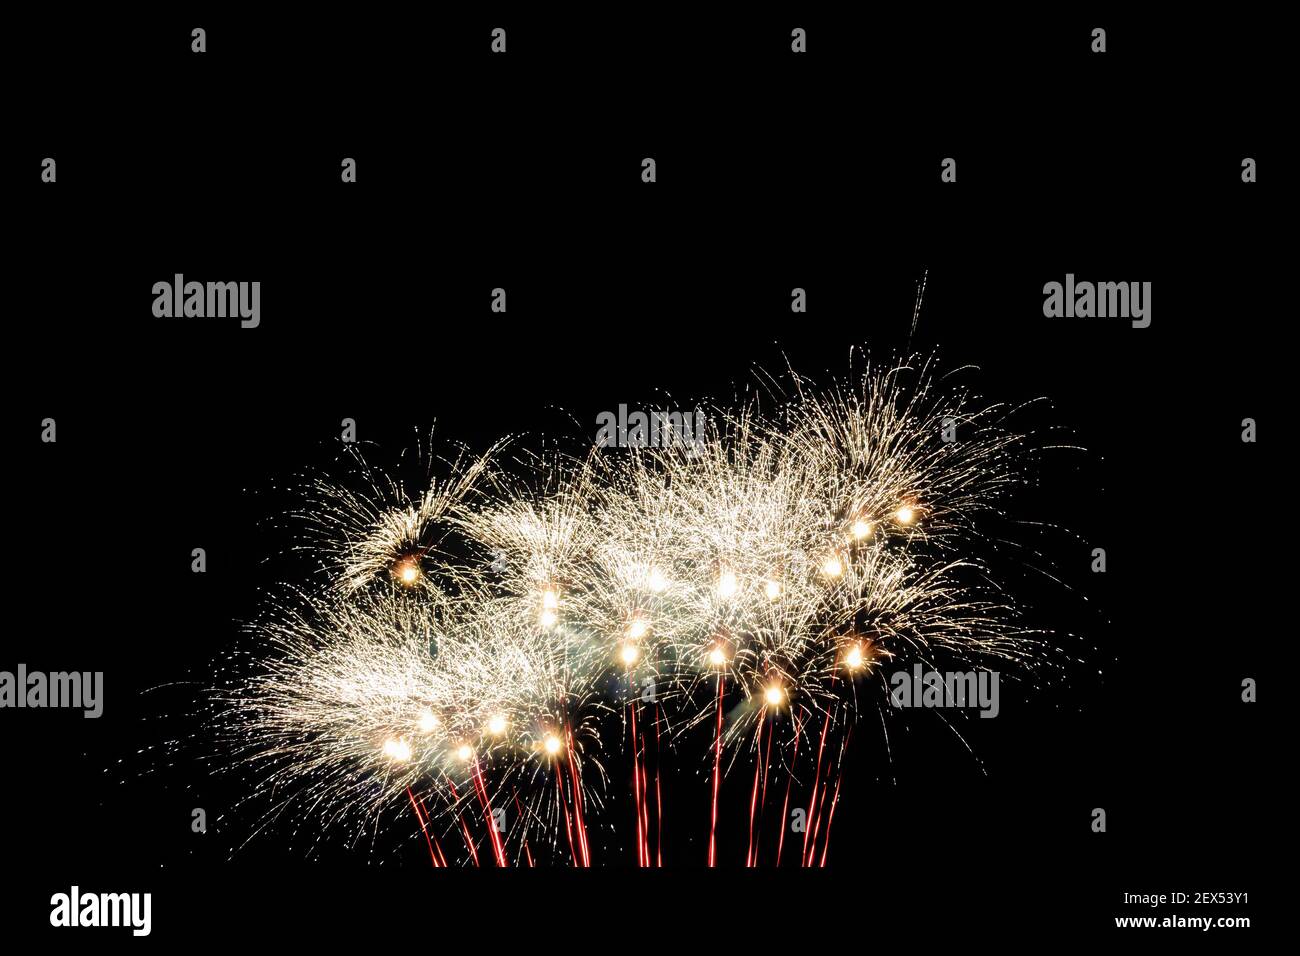 Image with a black background prepared to edit text of a firework, formed by a star of several branches of raw white color accompanied by red traces a Stock Photo